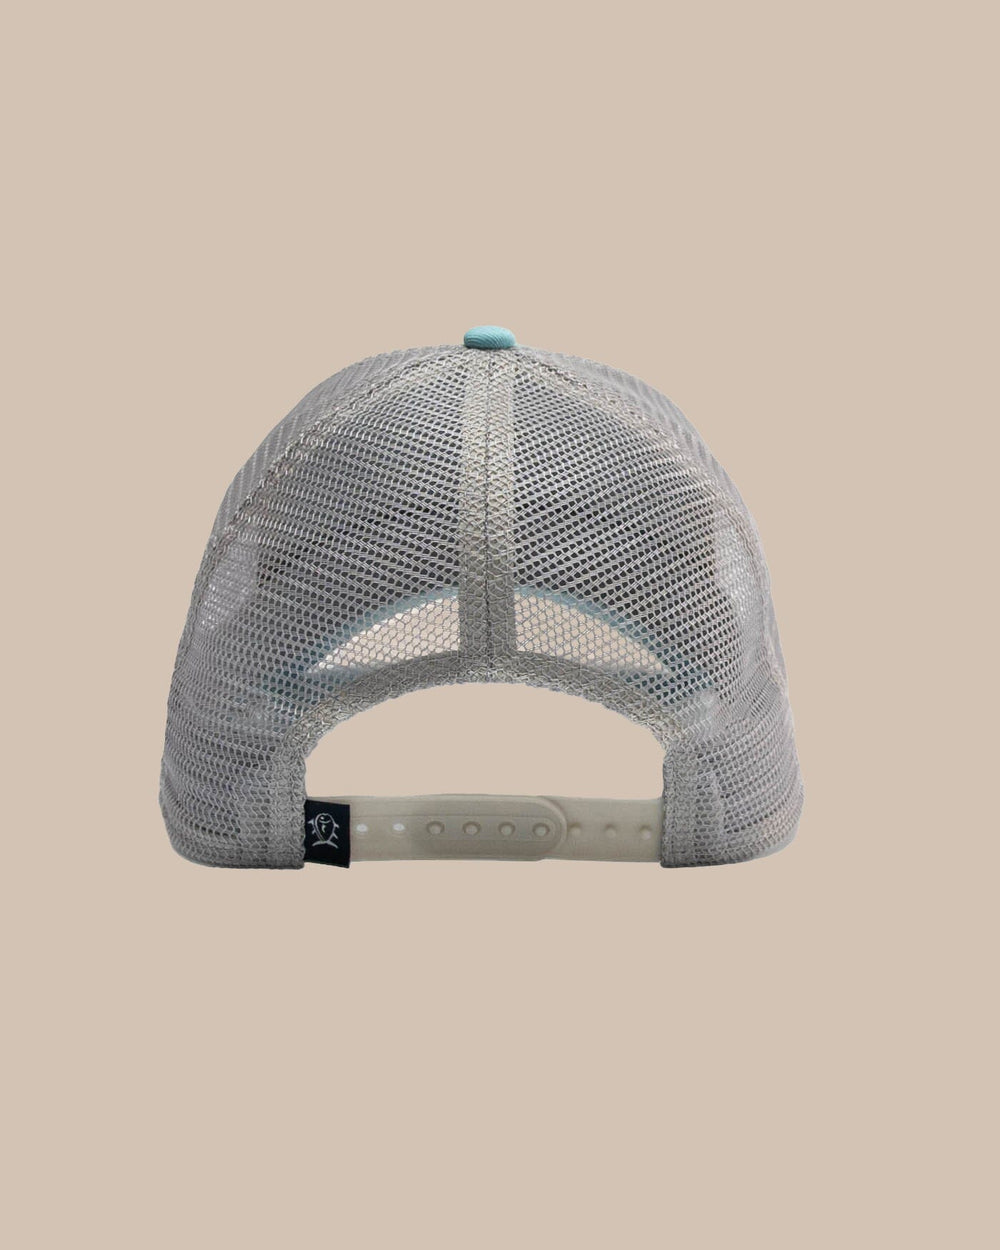 The back view of the Southern Tide Skipjack Trademark Trucker Hat by Southern Tide - Blue